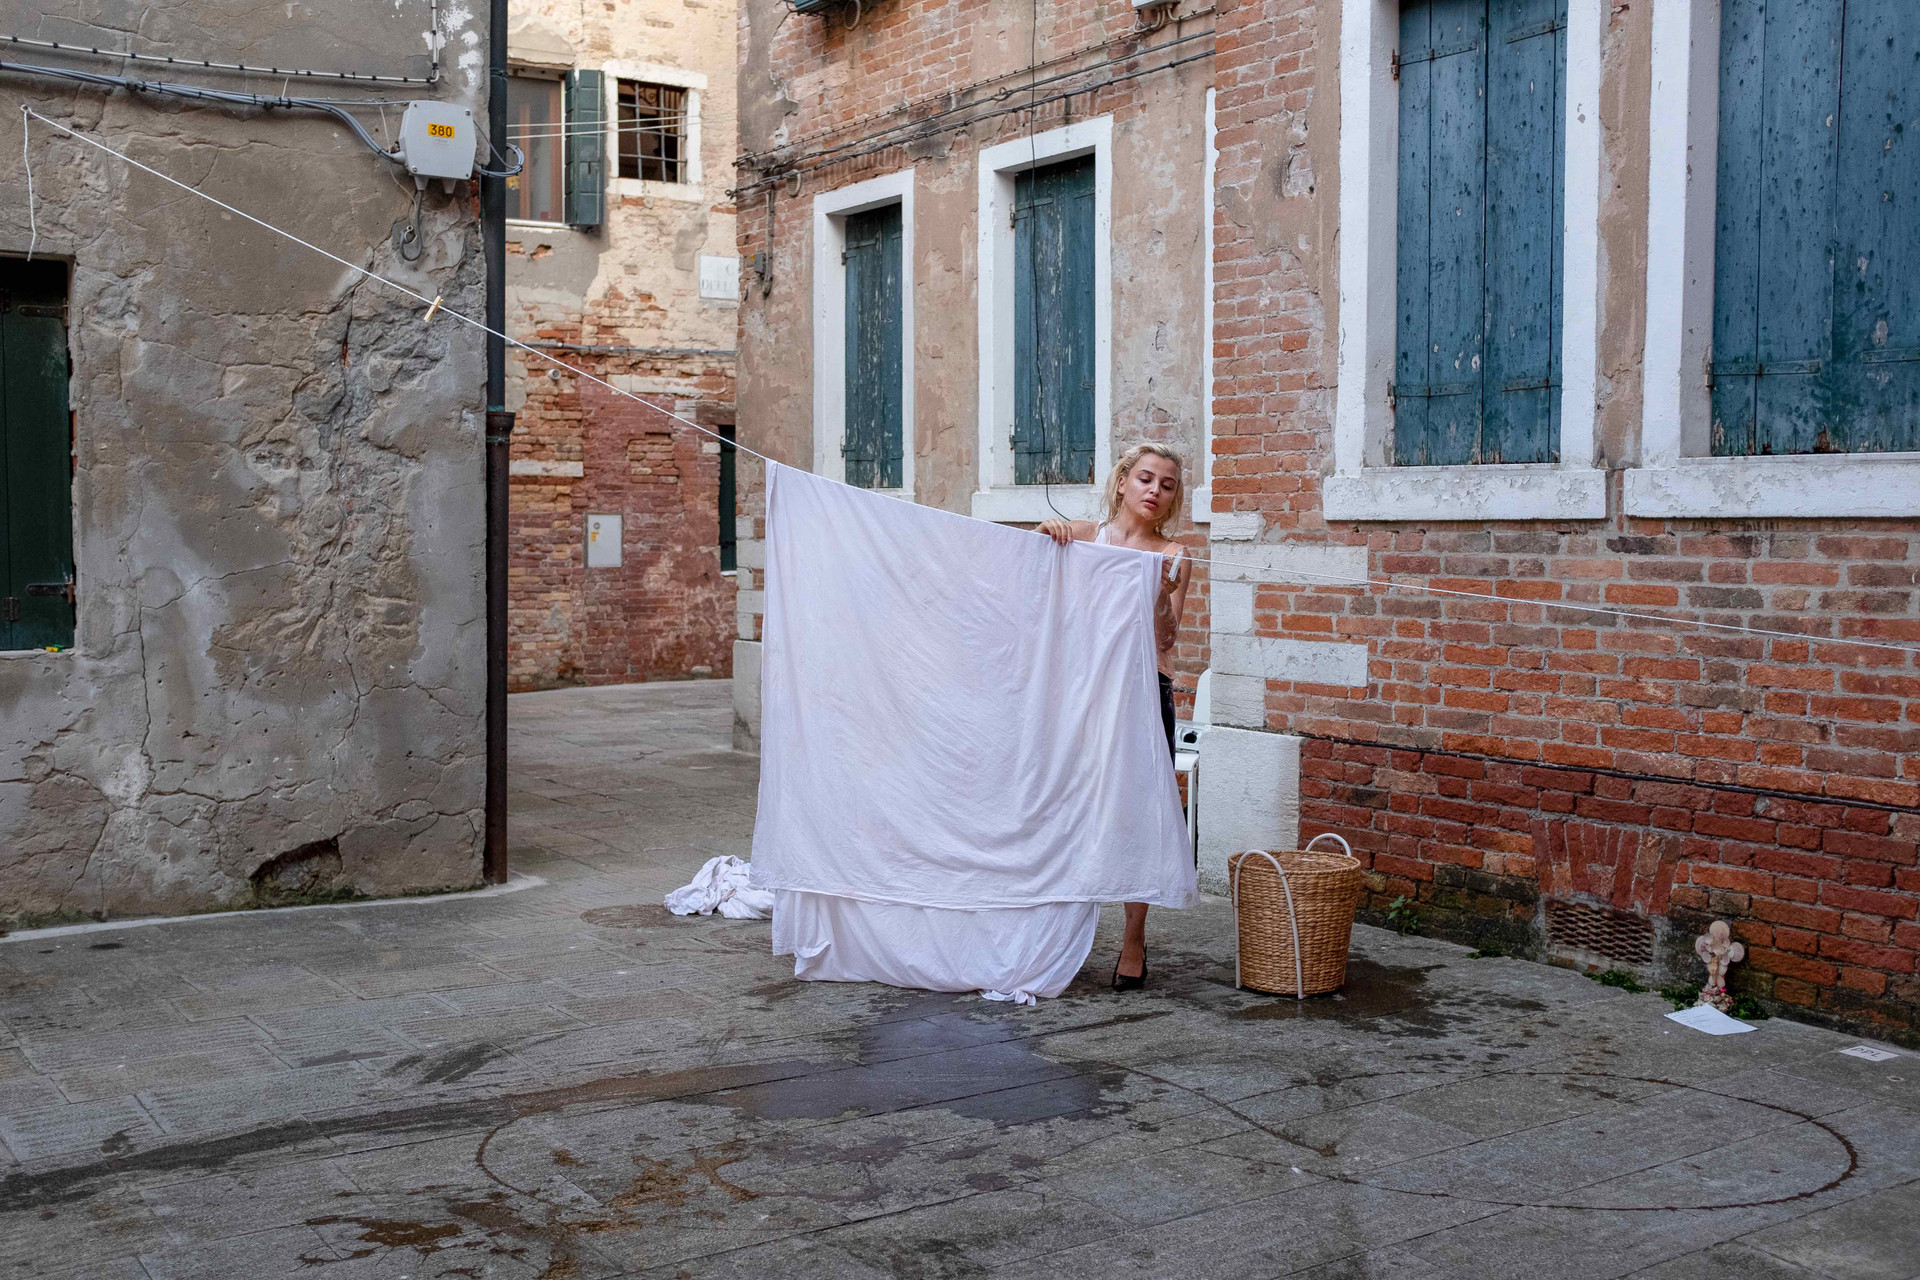 Rima Zamzam, Clean Shits, documentation of performance (approximately 40 minutes), 01st of August 2019, Venice